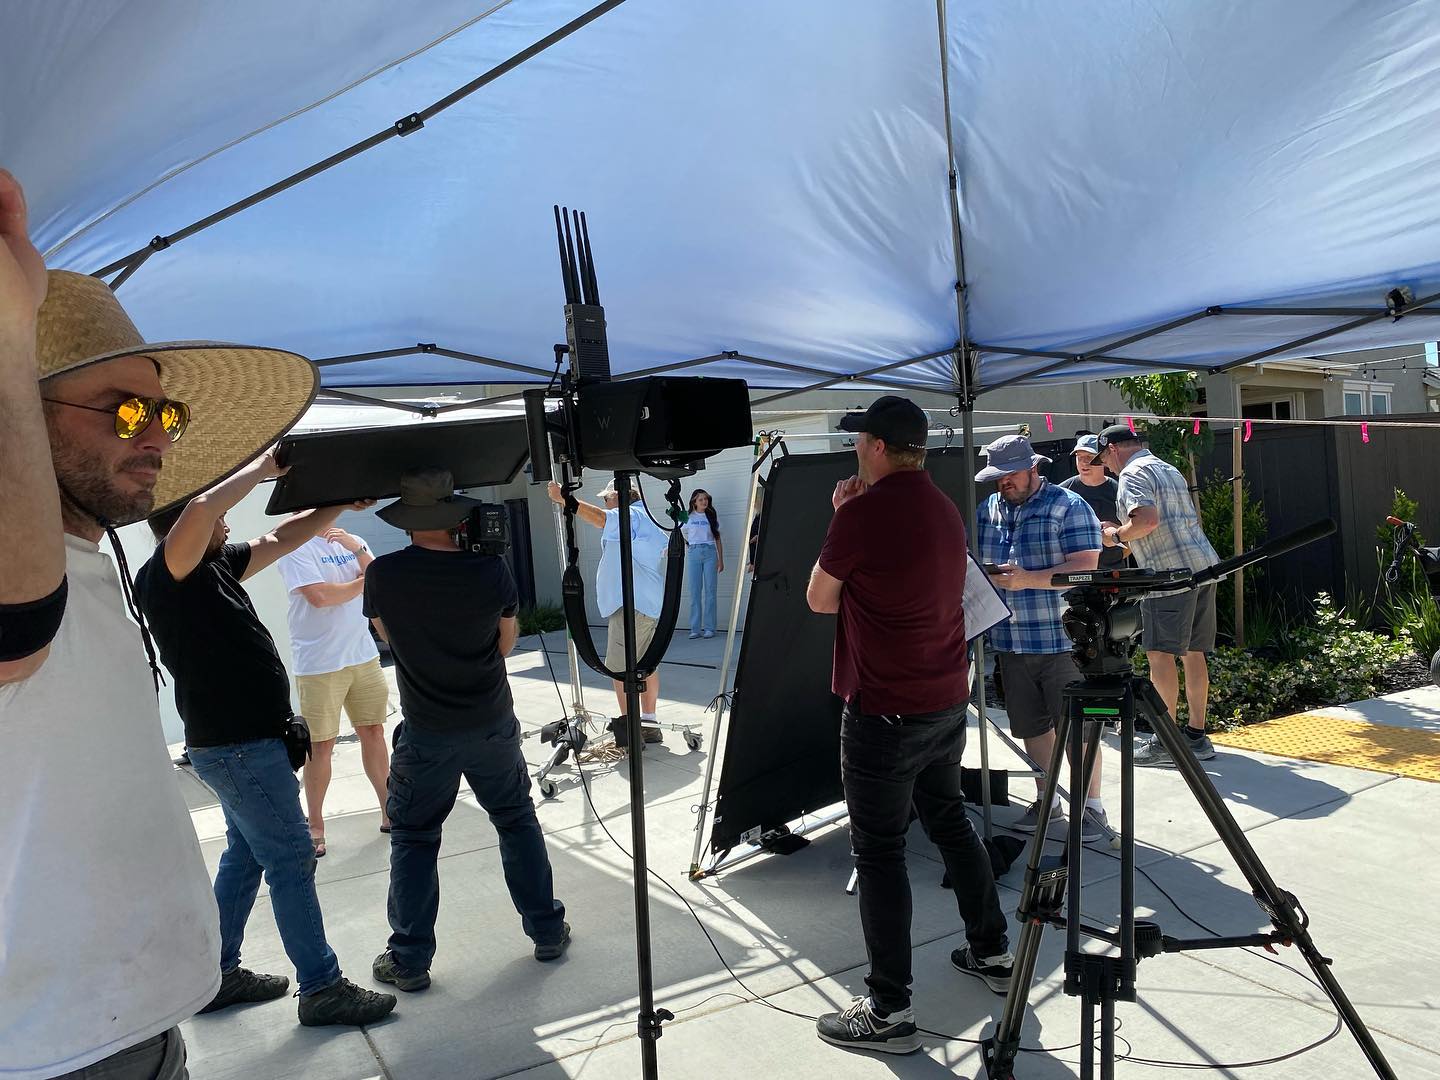 This one shot from our last two days of production says it all…it takes a team, this crew rocks it every time, and dang….was it hot. 🥵 But proud to work with everyone on behalf of @uncommon.us and @safecu thanks to everyone for their hard work. We appreciate you!